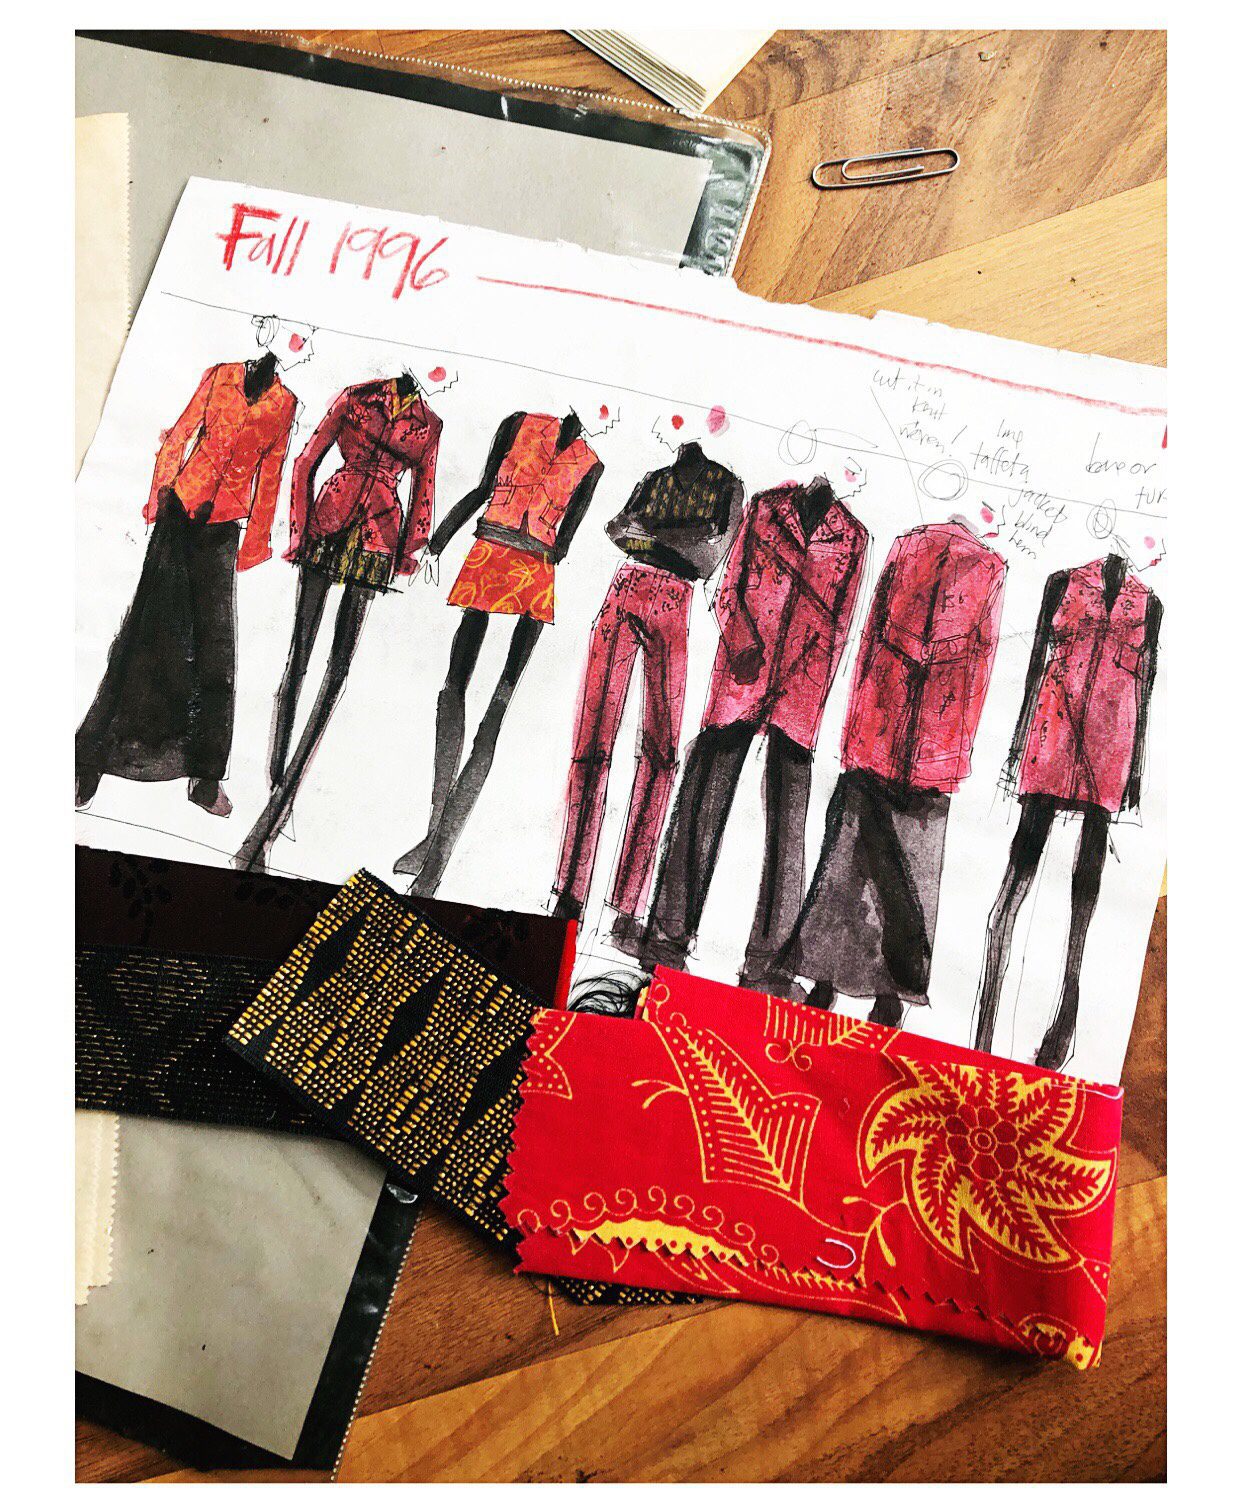 Fabric swatches and fashion croquis in gouache and pencil, by Laura Volpintestaq